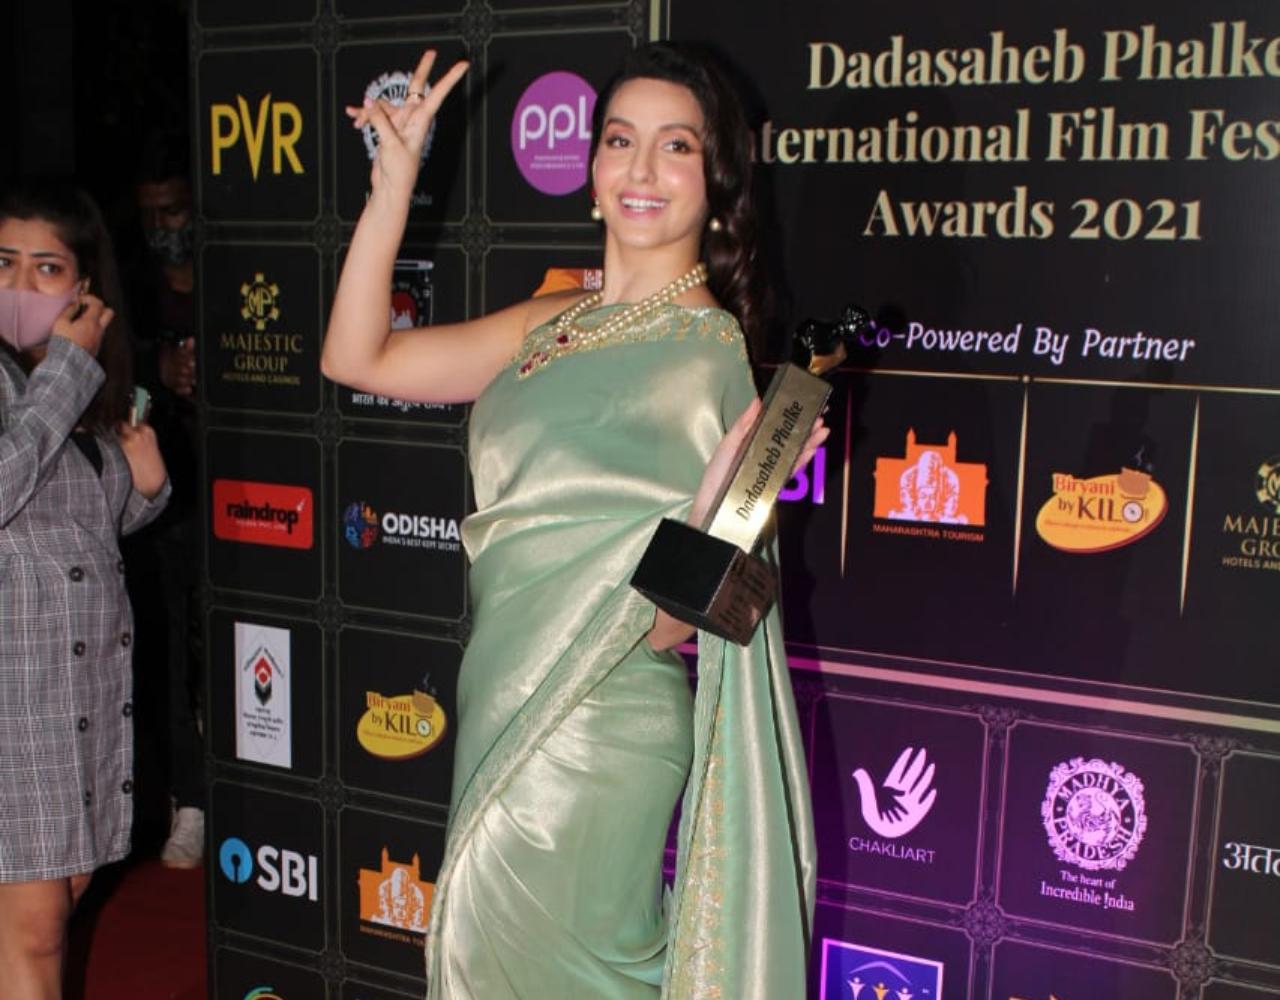 Nora Fatehi looked happy and cheerful in her traditional green saree. She left everyone in awe as she graced the red carpet.